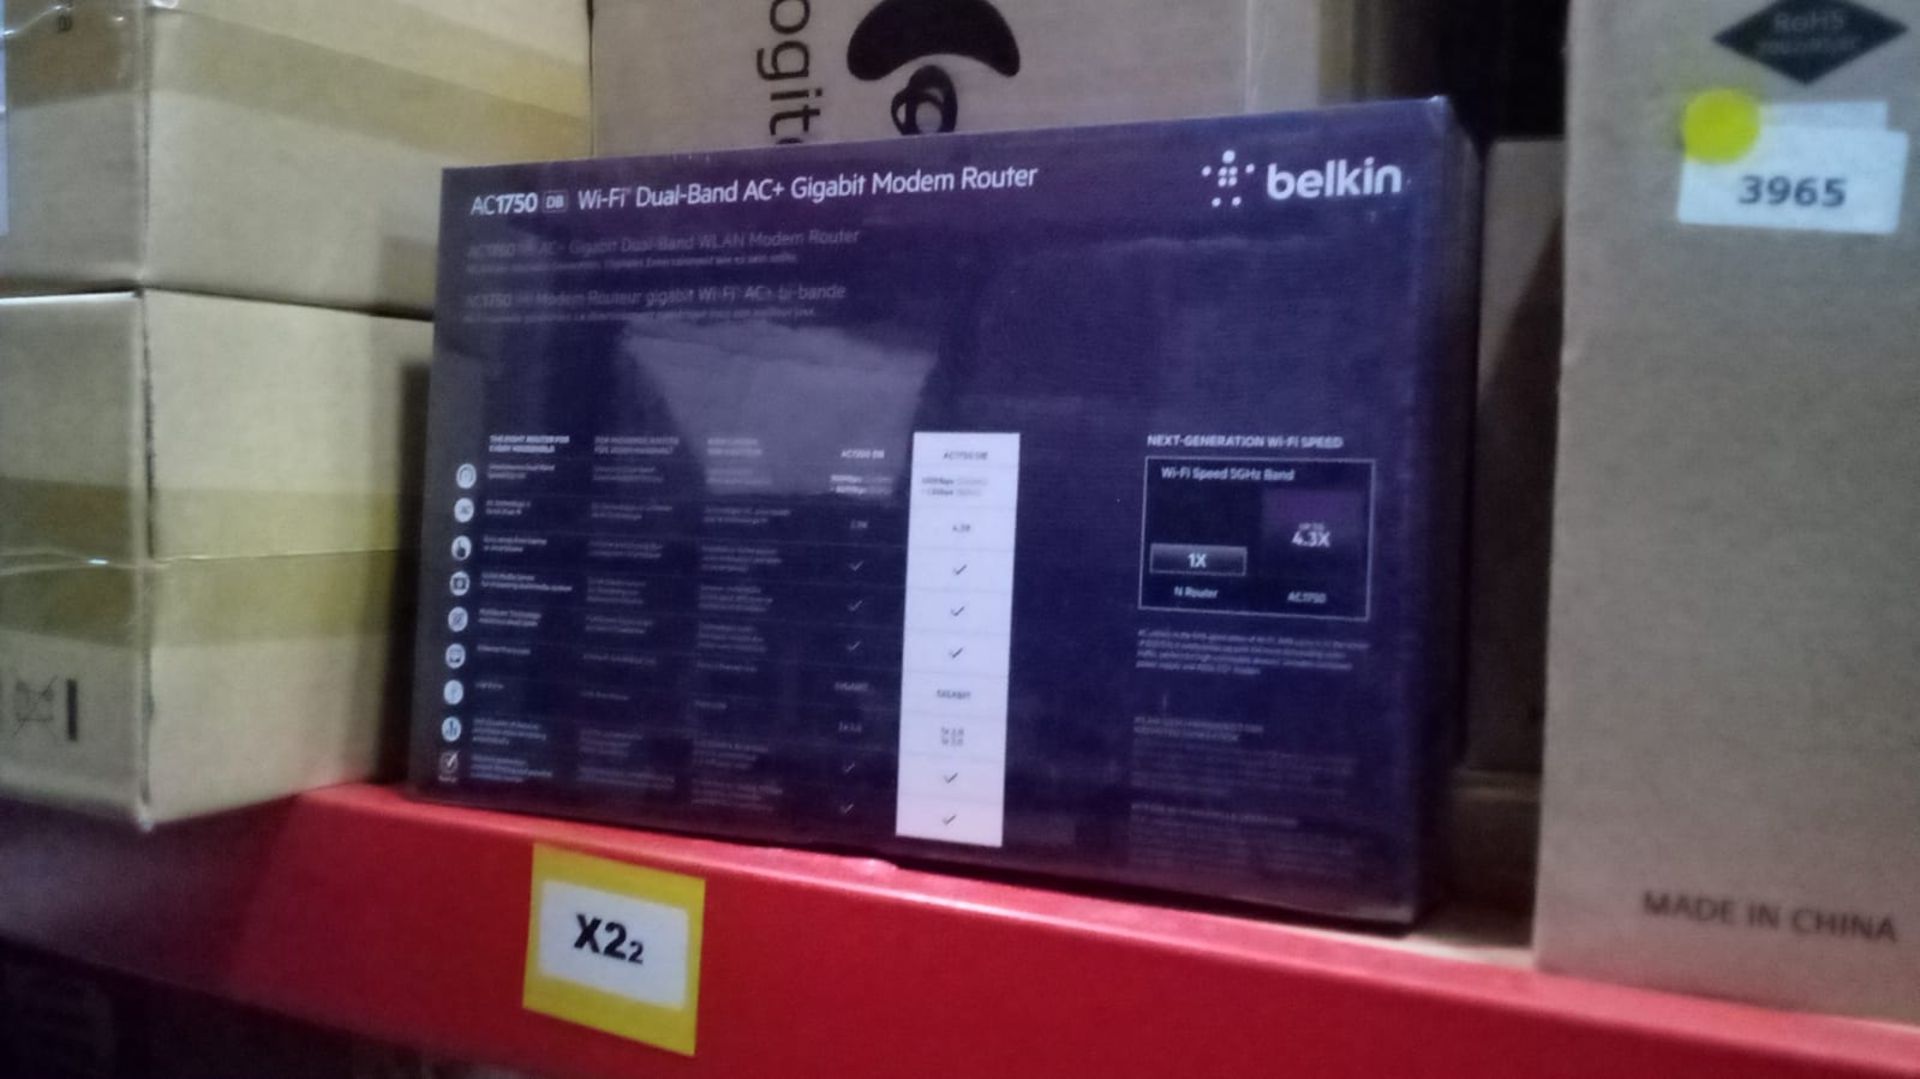 50pcs - Sealed Belkin AC1750 Dual Band WiFi Gigabit Moden Router Euro Plug - Unchecked Untested in - Image 3 of 4